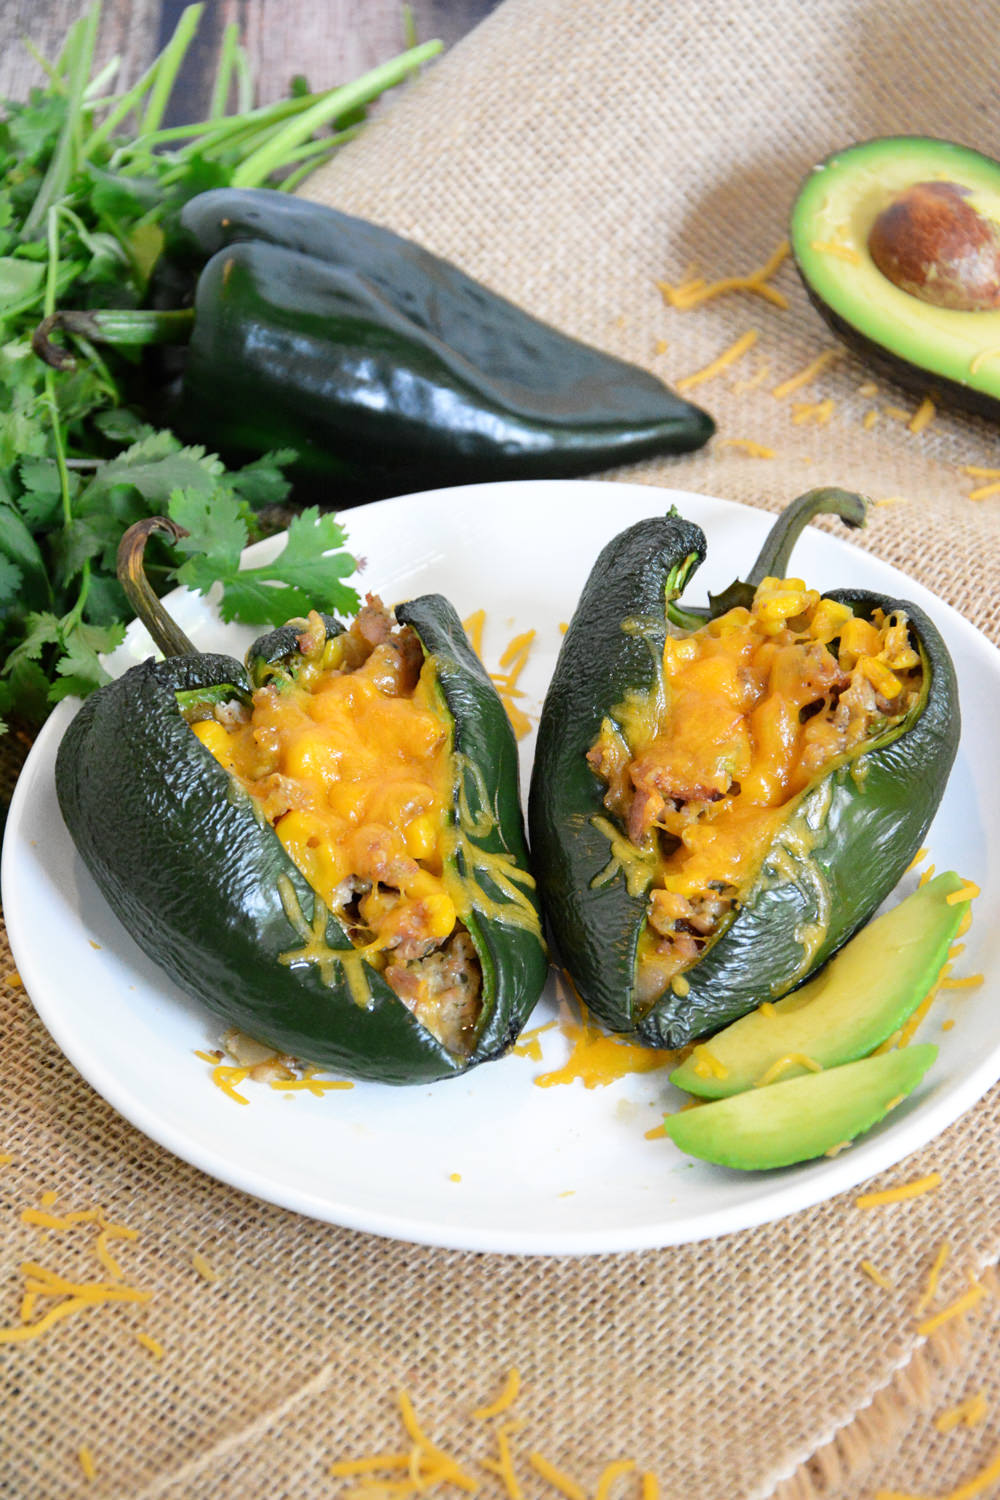 Stuffed poblano peppers loaded with flavorful chicken sausage, green chiles and fresh corn to make one nutrient dense meal!